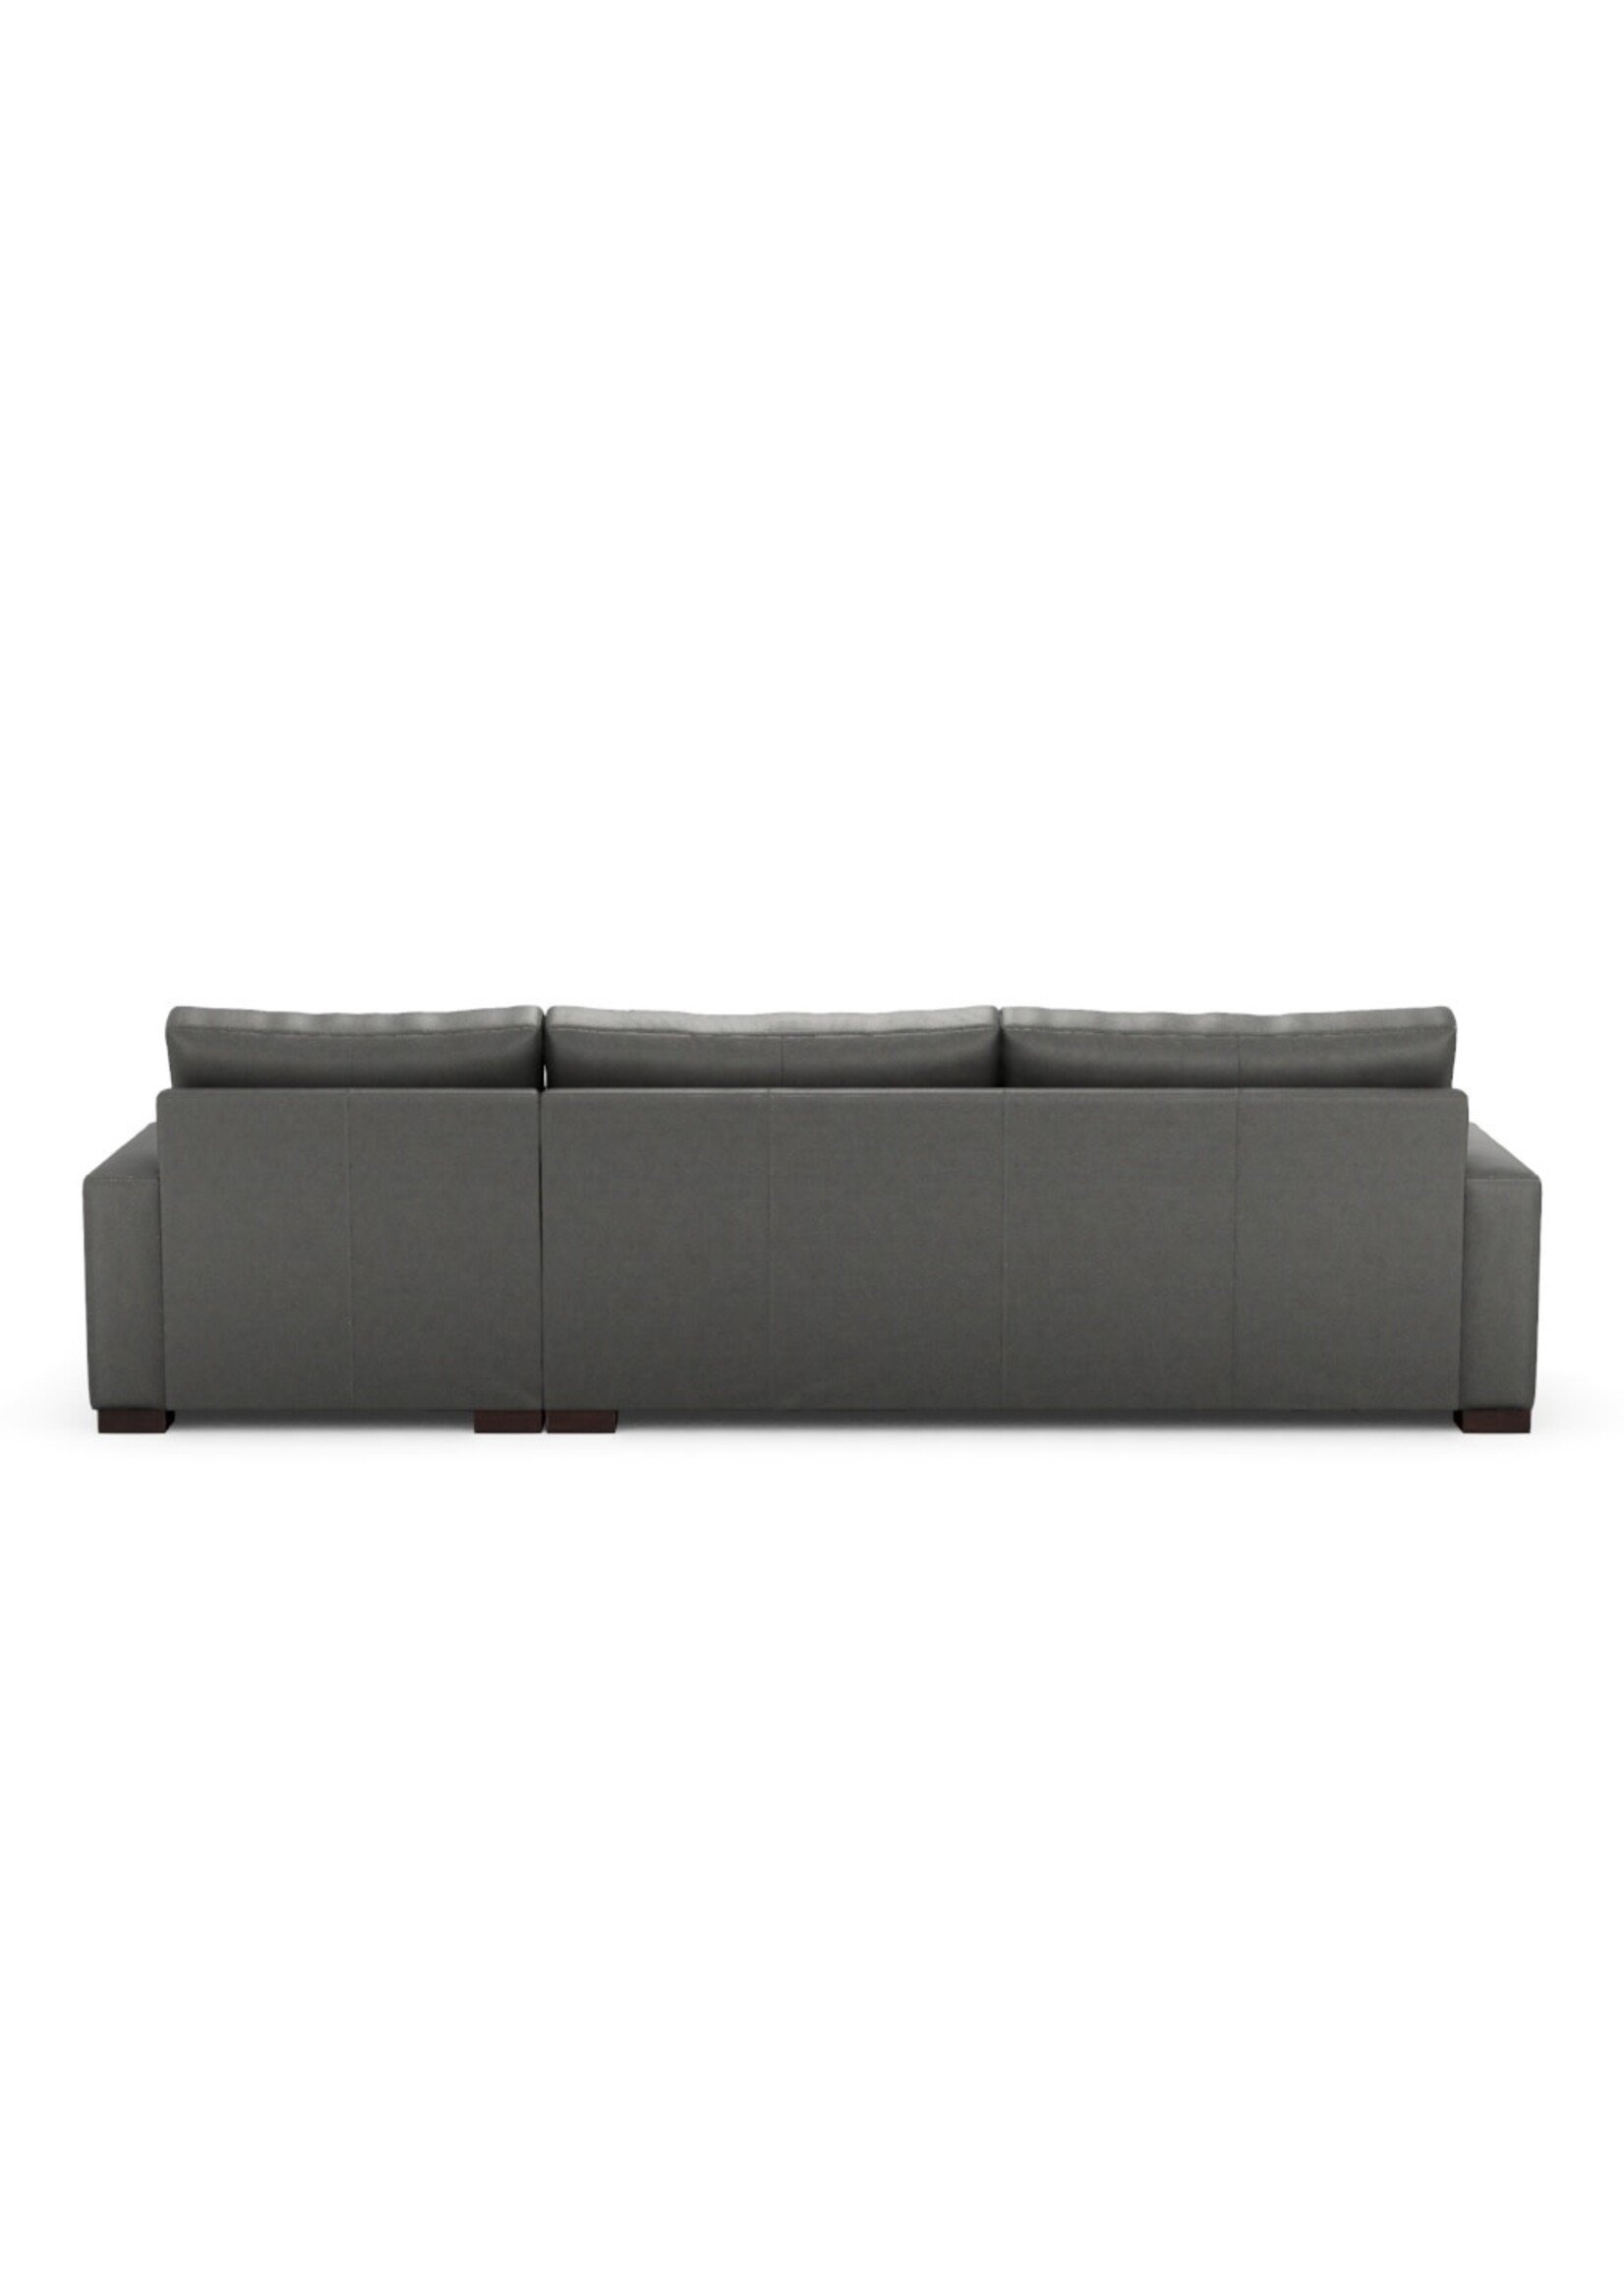 Rivera Sofa w/ LA Facing Chaise-Track Arm-Landscape Frozen Valley Only 1 in stock 117" x 67" Chaise